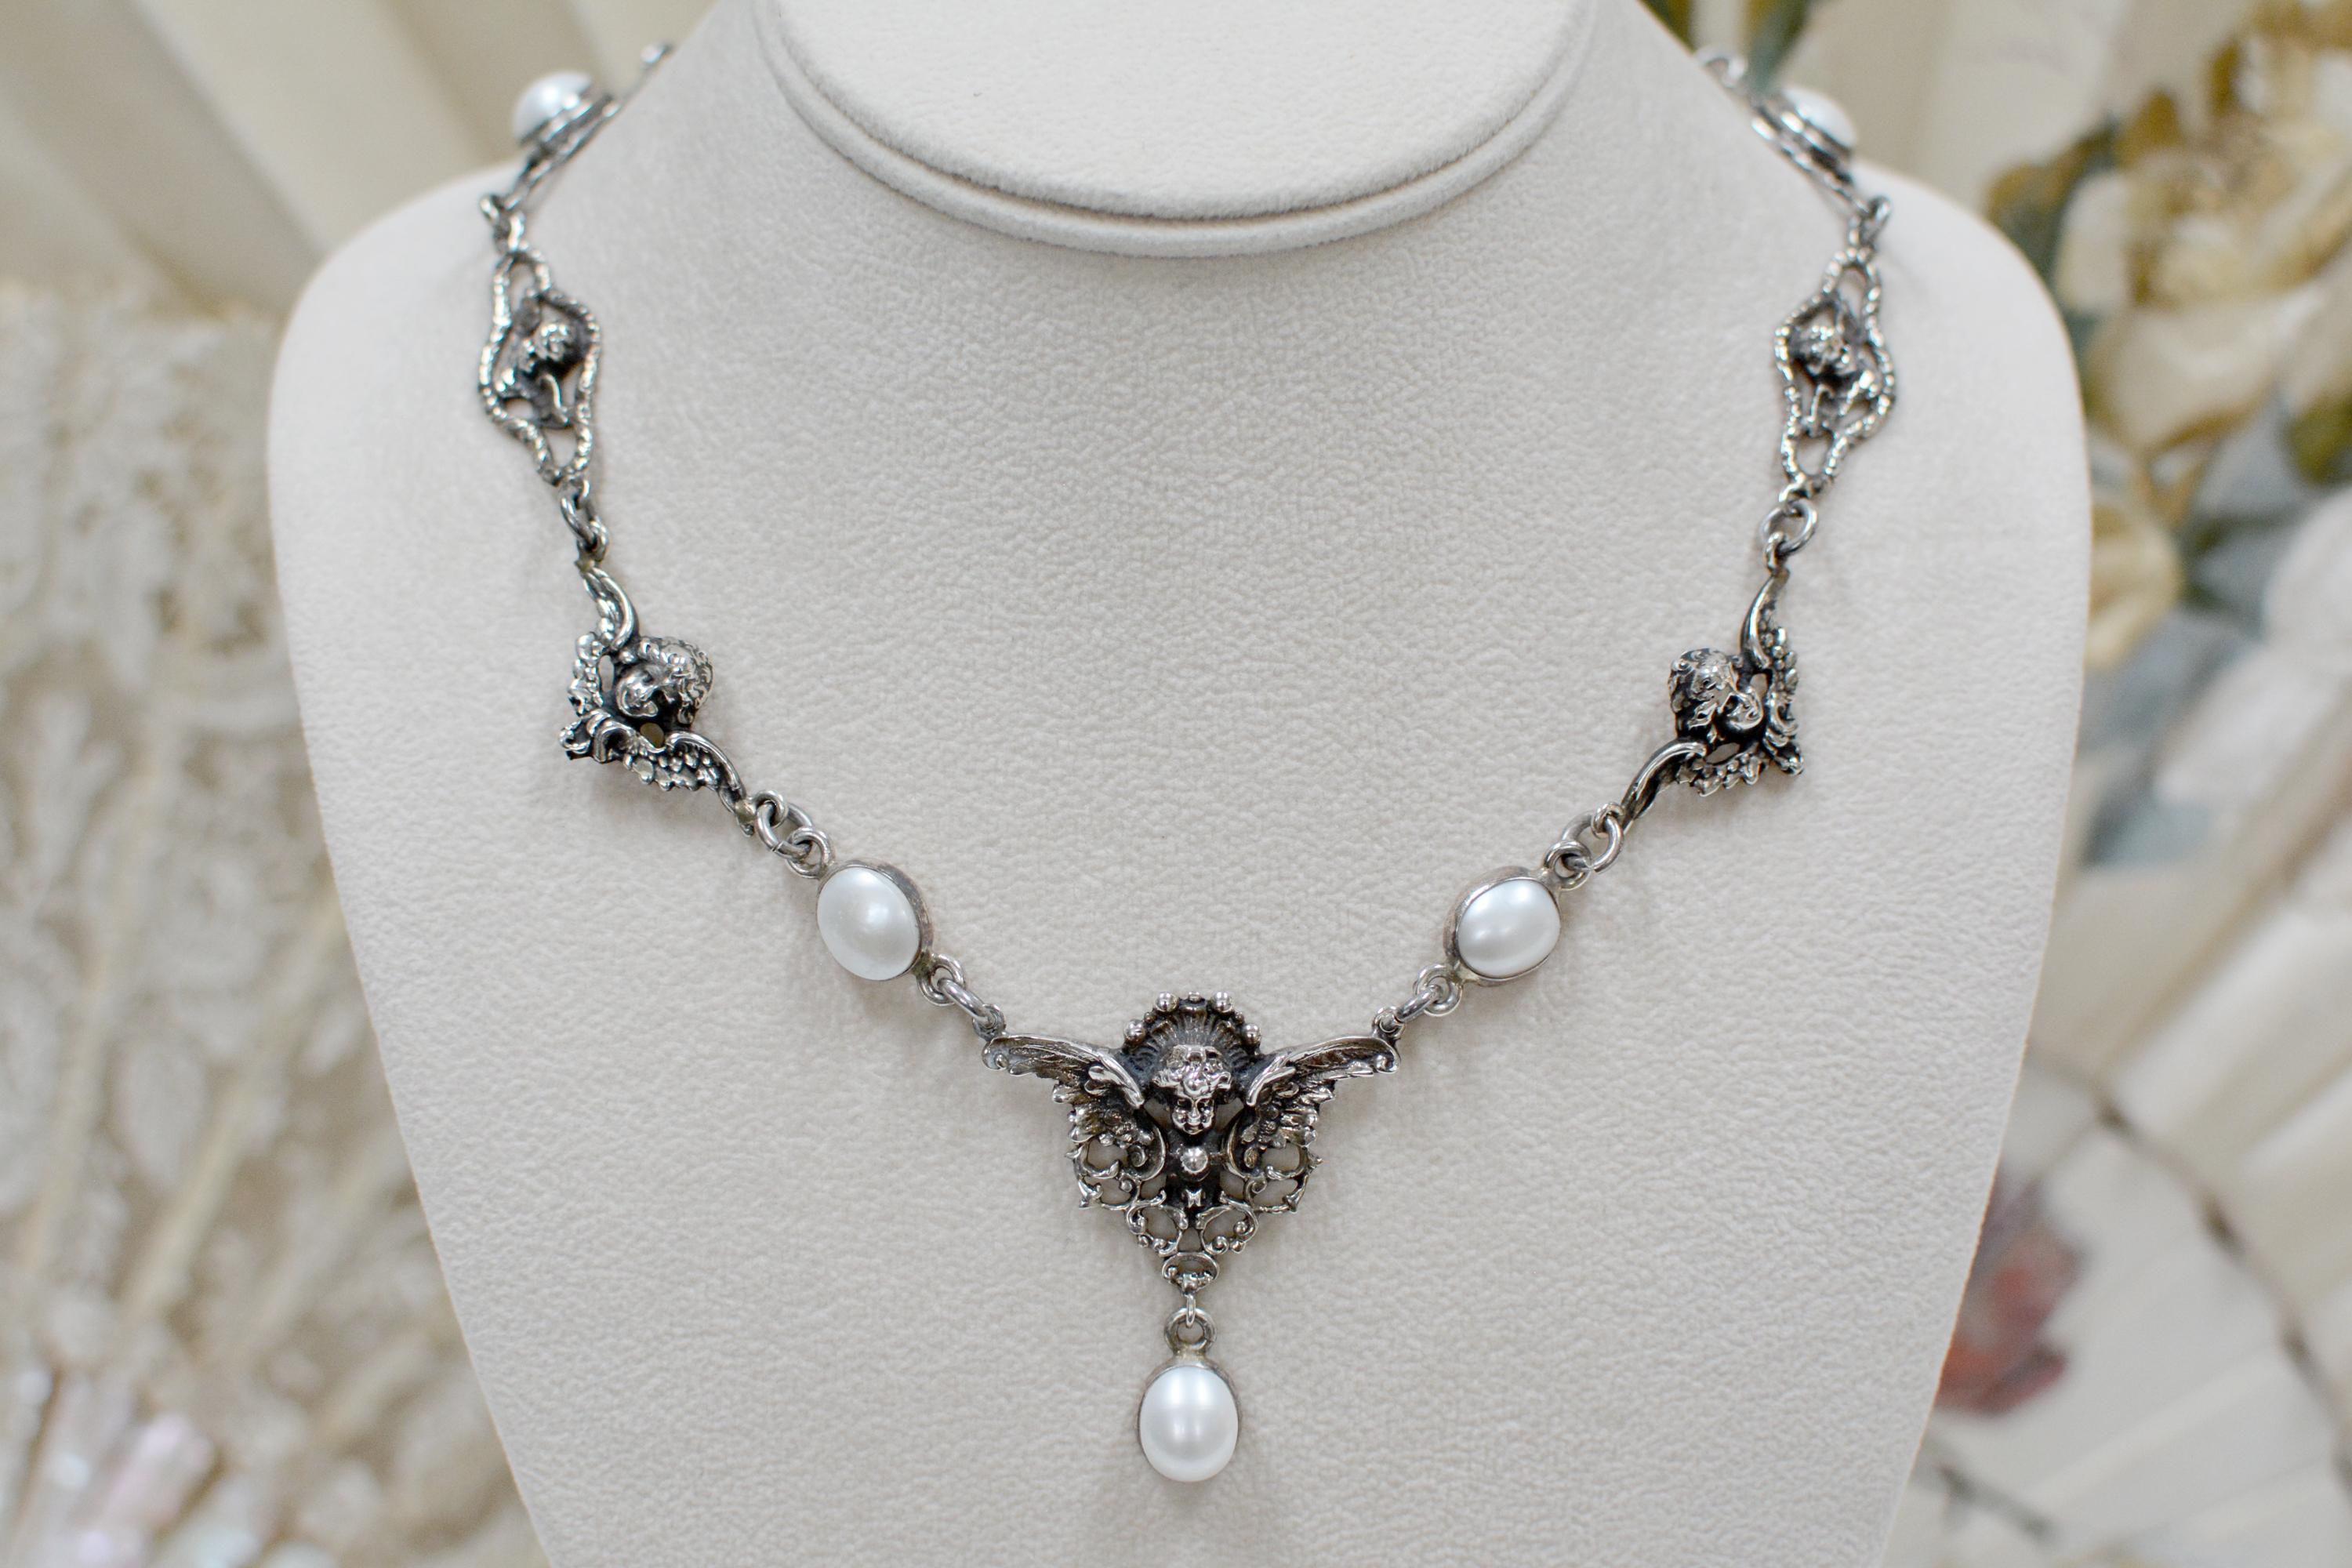 Baroque Jill Garber Collection Drop Necklace with Figural Angels and Freshwater Pearls